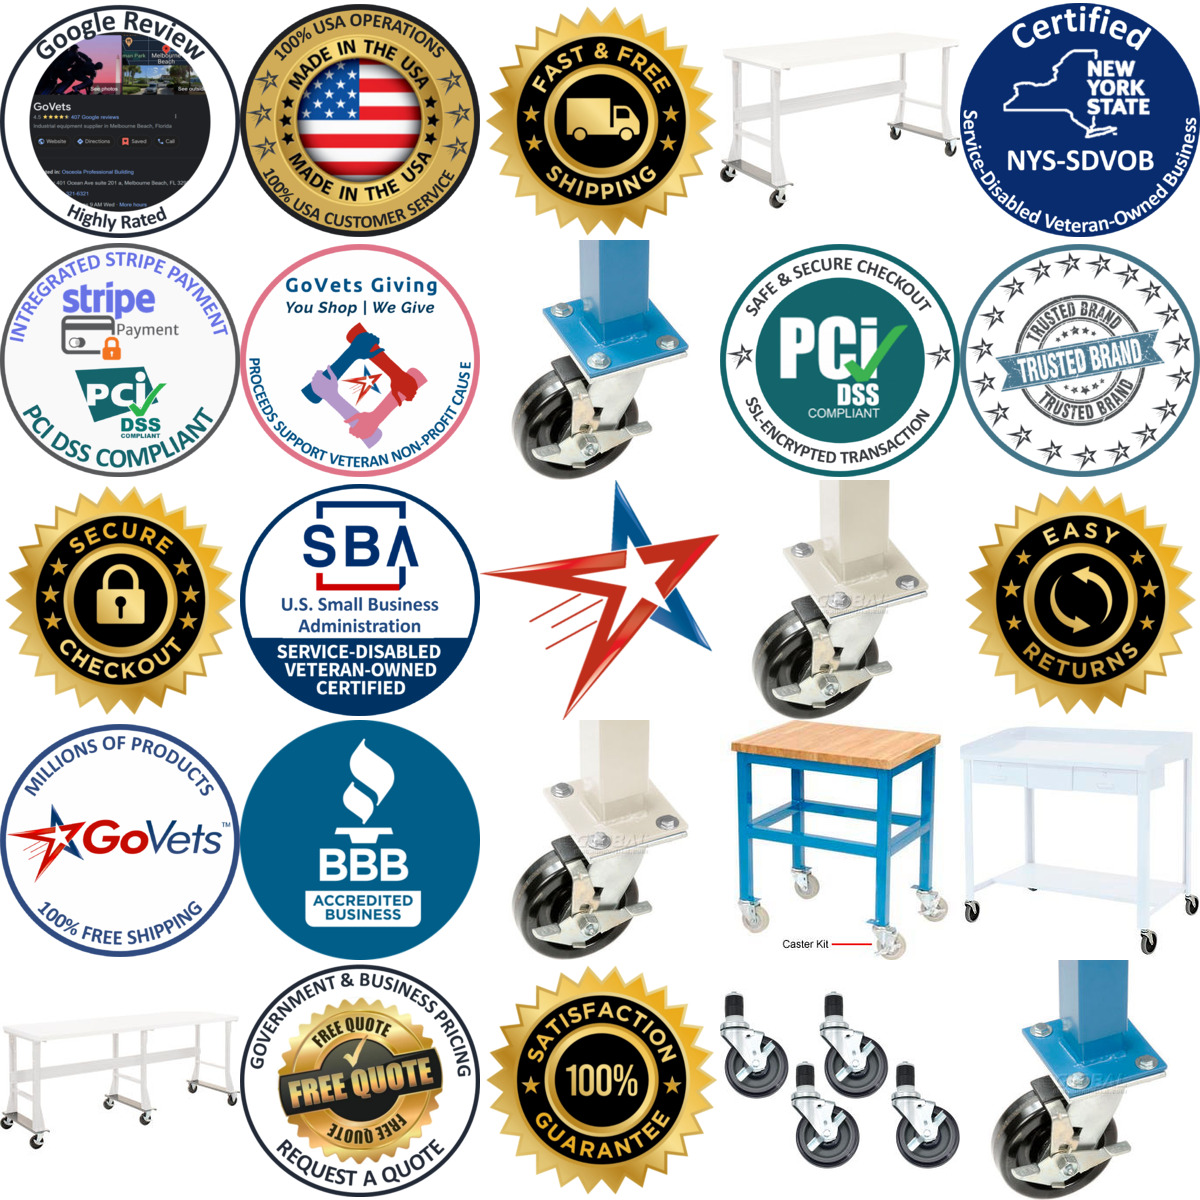 A selection of Workbench Casters products on GoVets